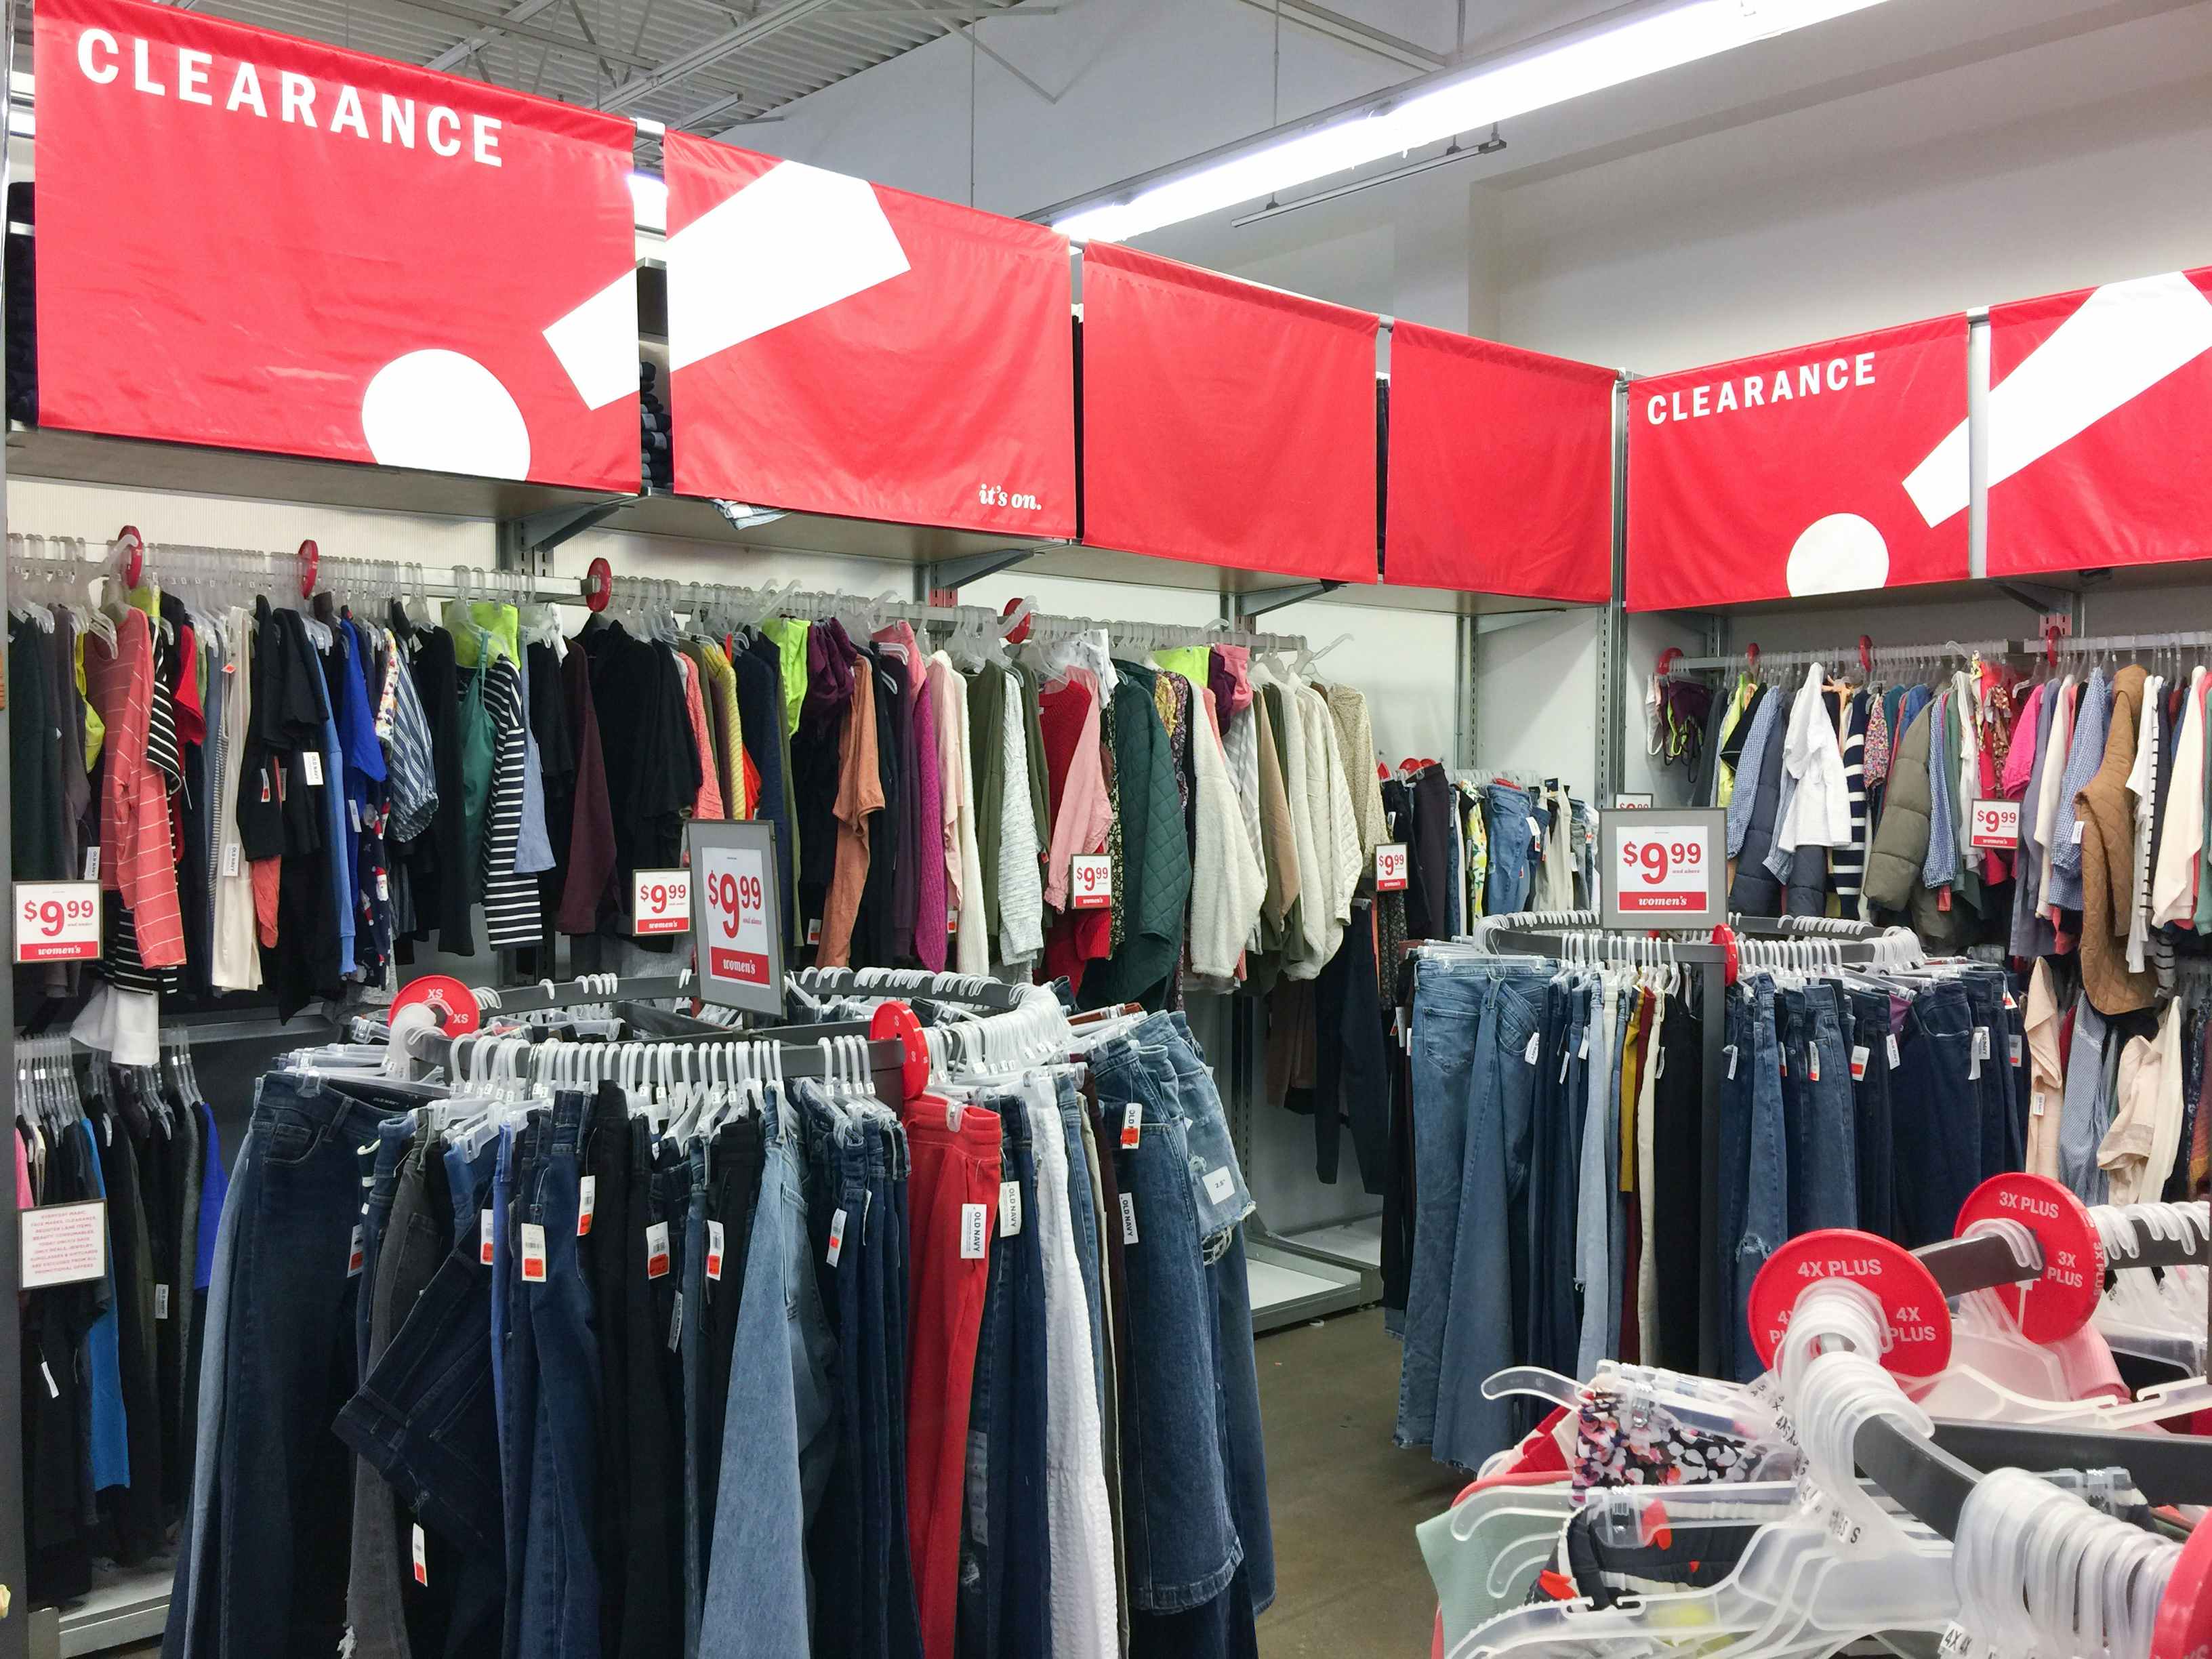 Old Navy Clearance Sale: Save up to 75% off styles for men and women